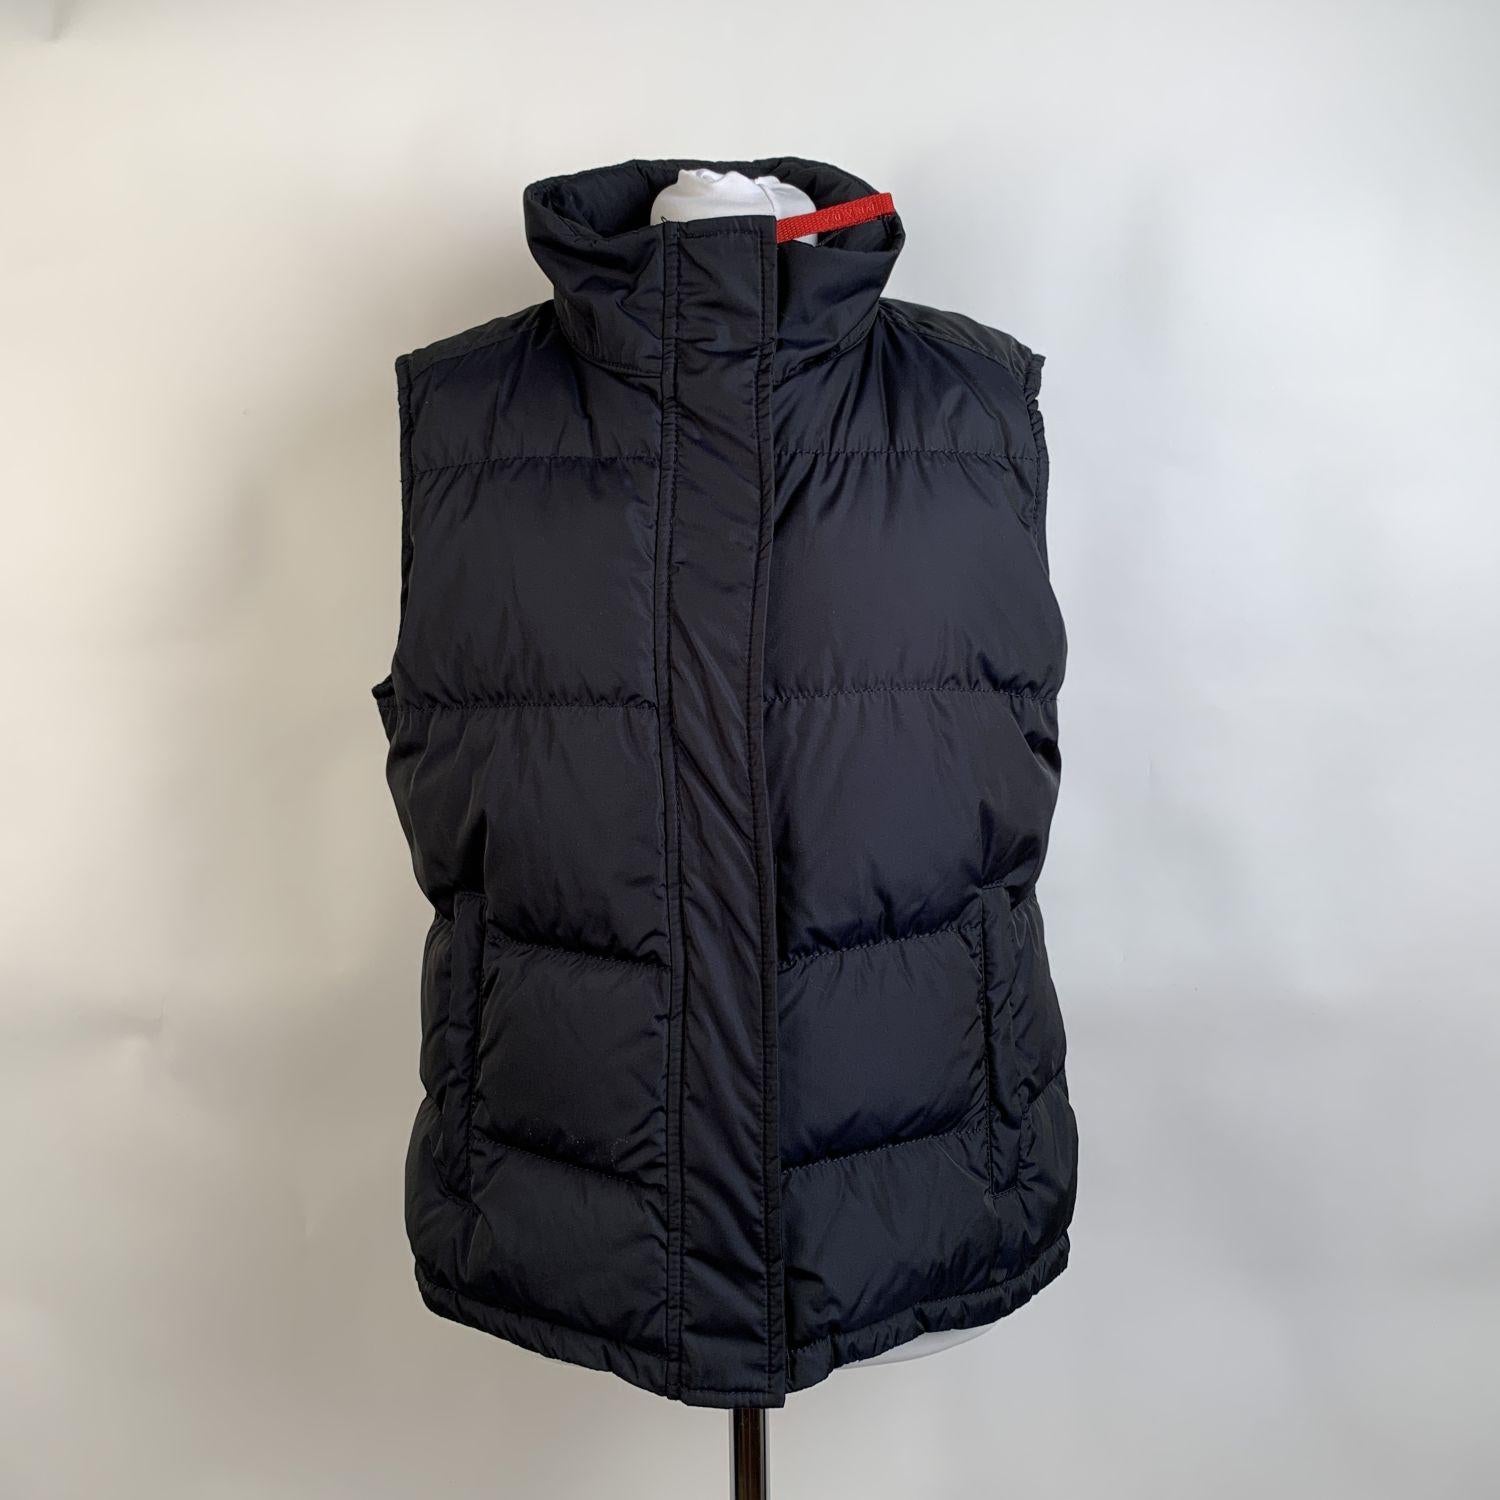 PRADA sleeveless down jacket. Constructed in navy blue nylon with a quilted pattern. Down feather padding. It features a high neck with concealed hood, a zipper closure down the front and 2 zippered pockets. Inner pockets. Size: 46 IT (The size